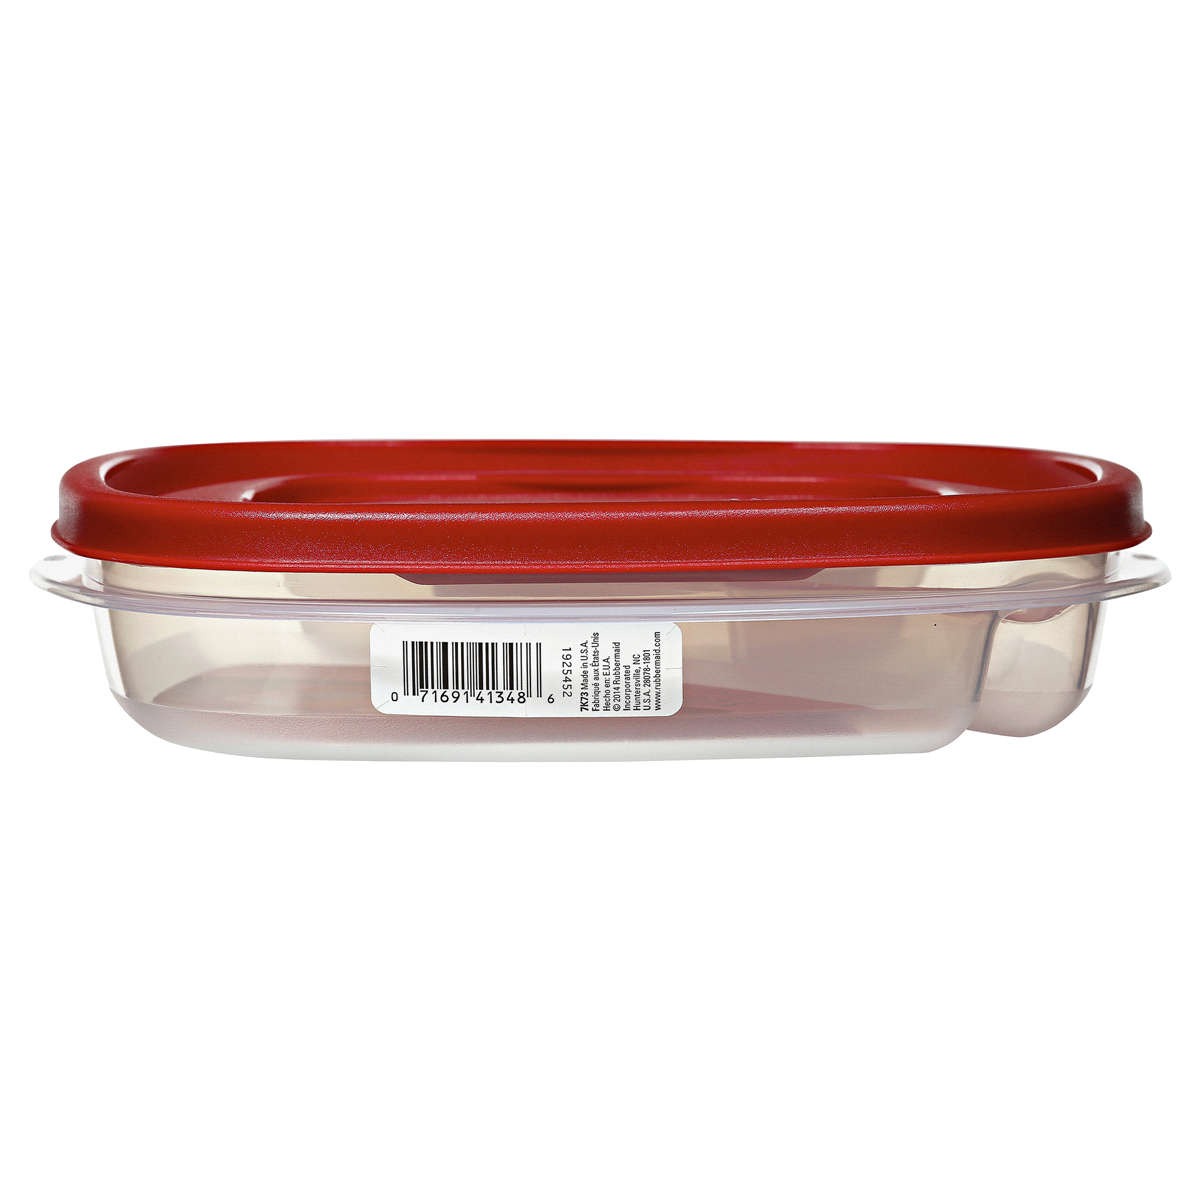 Rubbermaid Premier Food Container, 14 Cup, Bakeware & Cookware